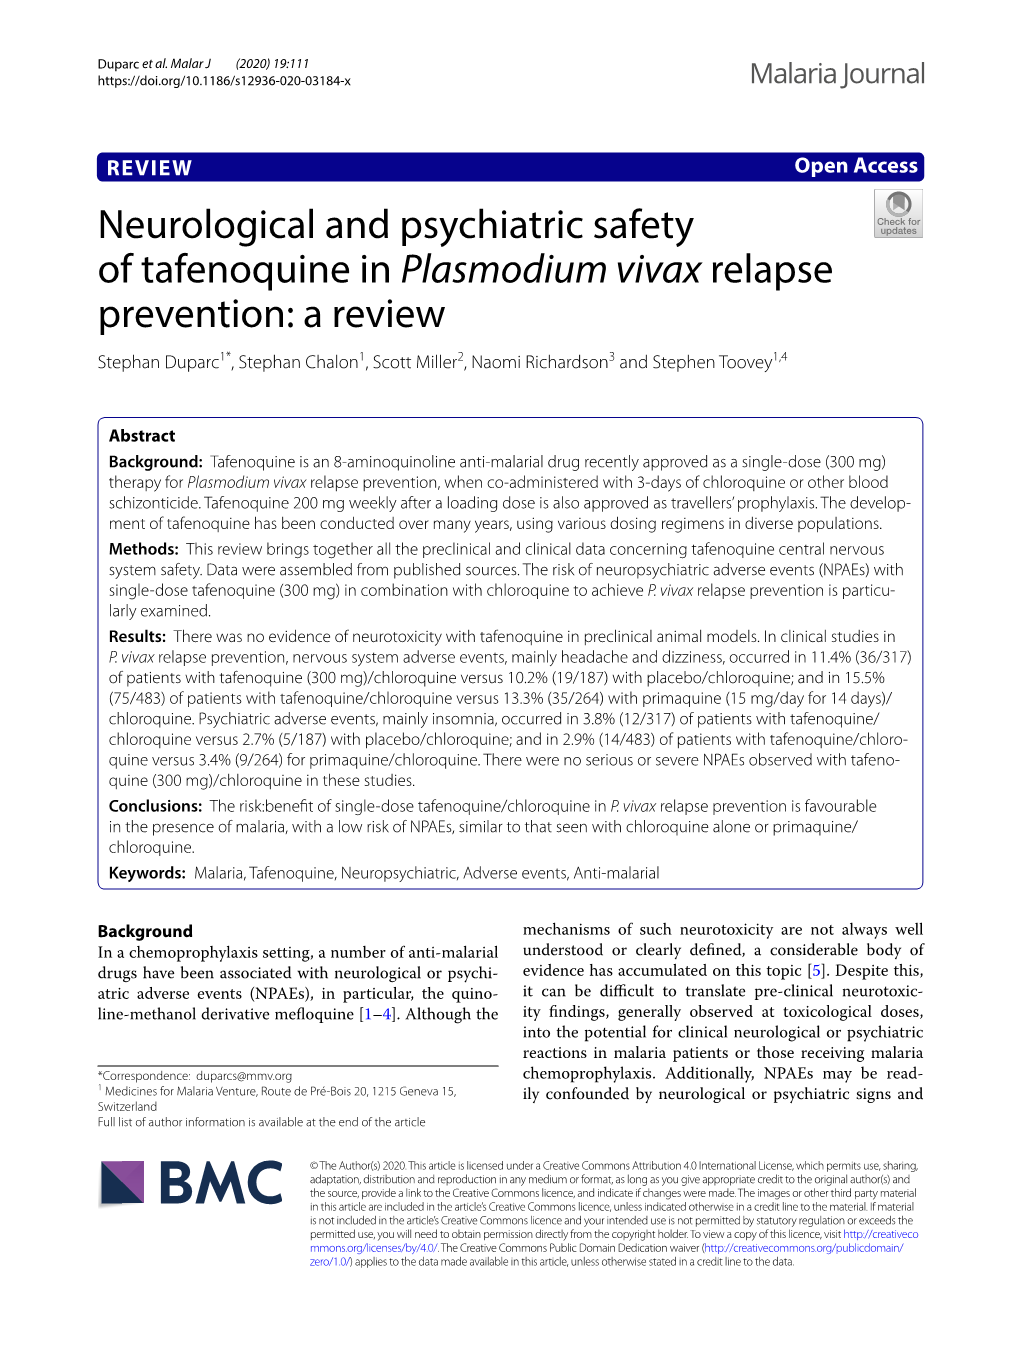 Neurological and Psychiatric Safety of Tafenoquine in Plasmodium Vivax